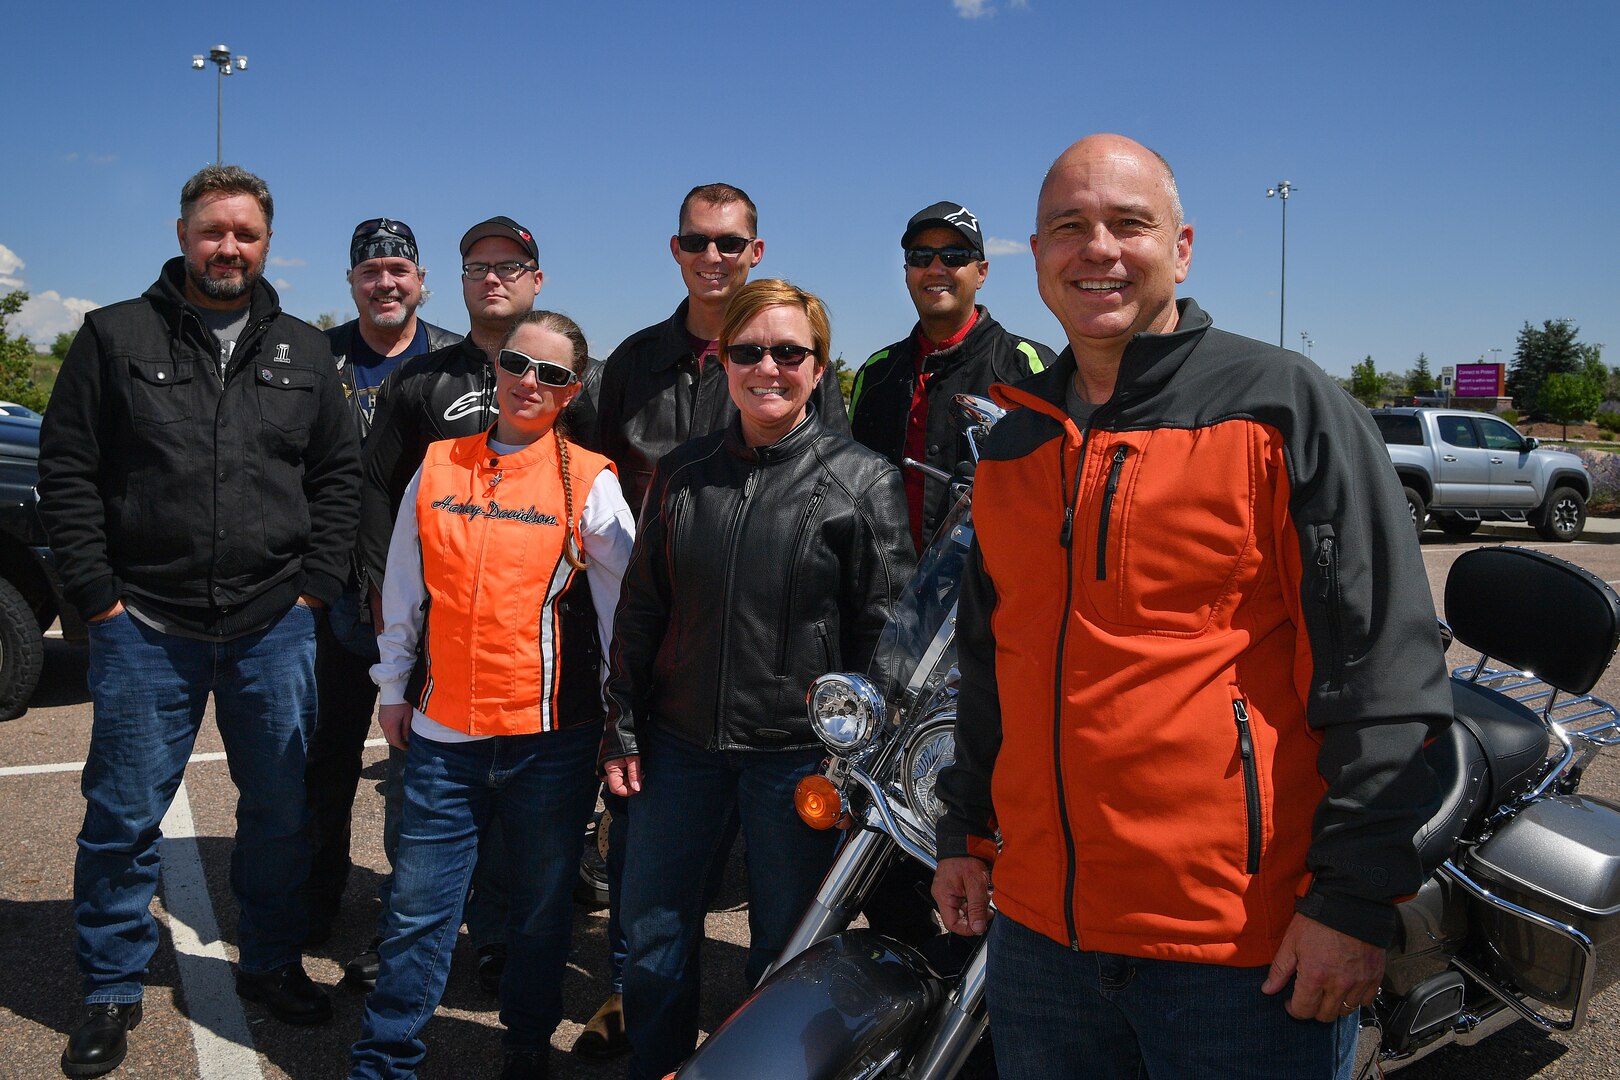 Group of motorcycle riders pose for a photo